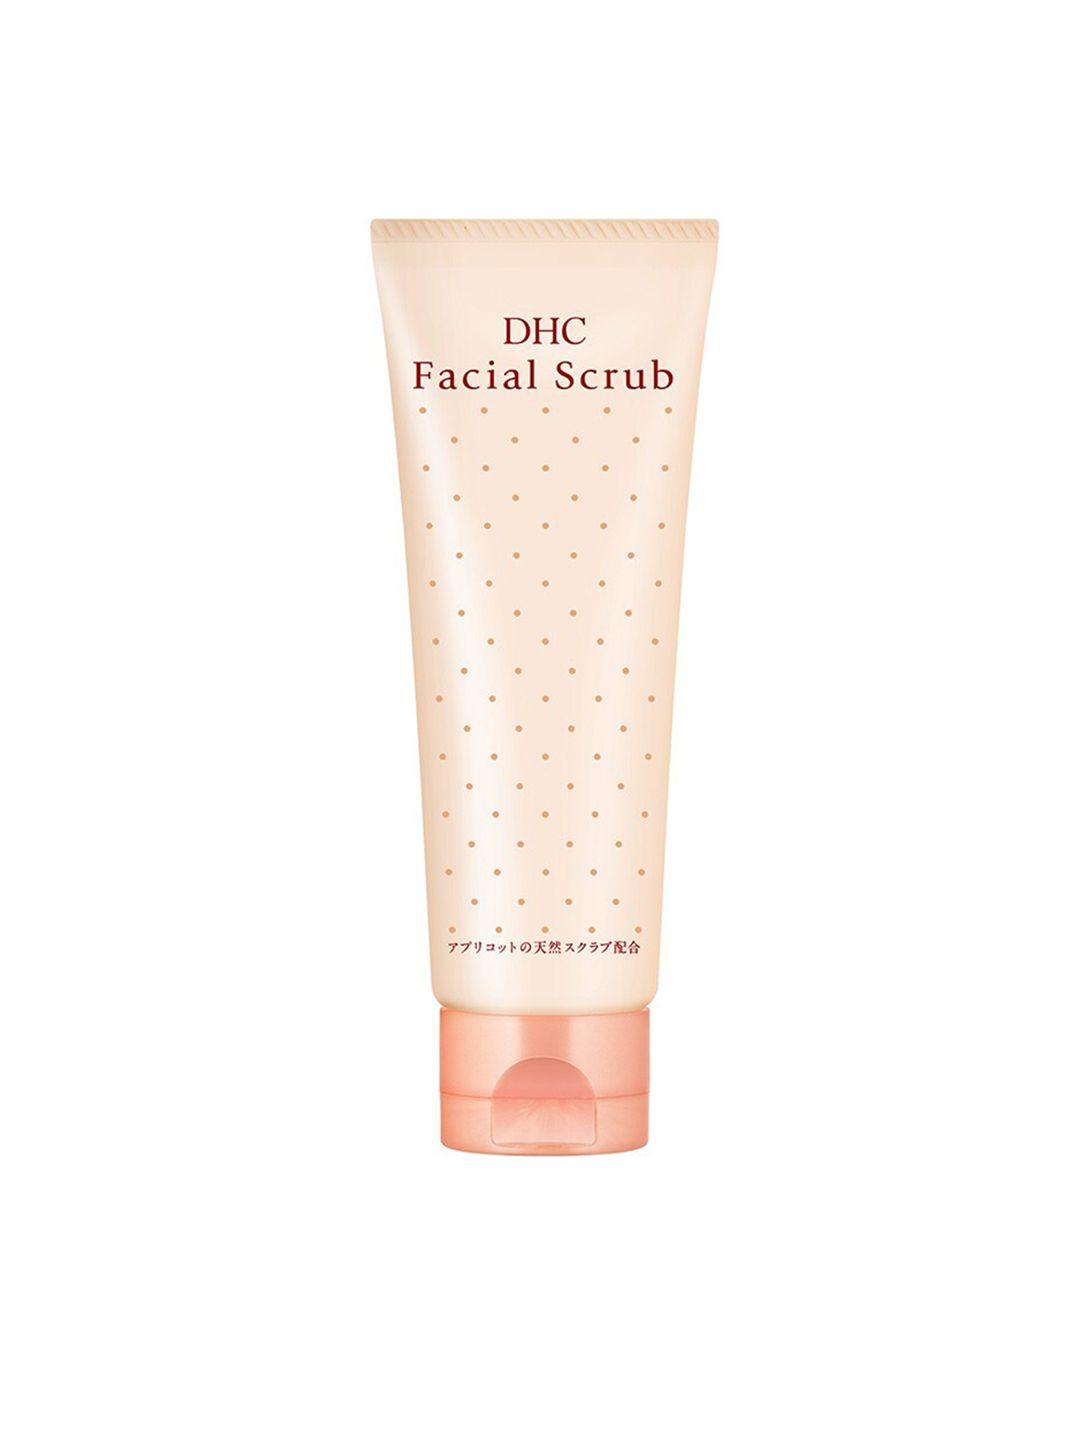 dhc beauty exfoliating facial scrub for smooth & hydrated skin - 100g